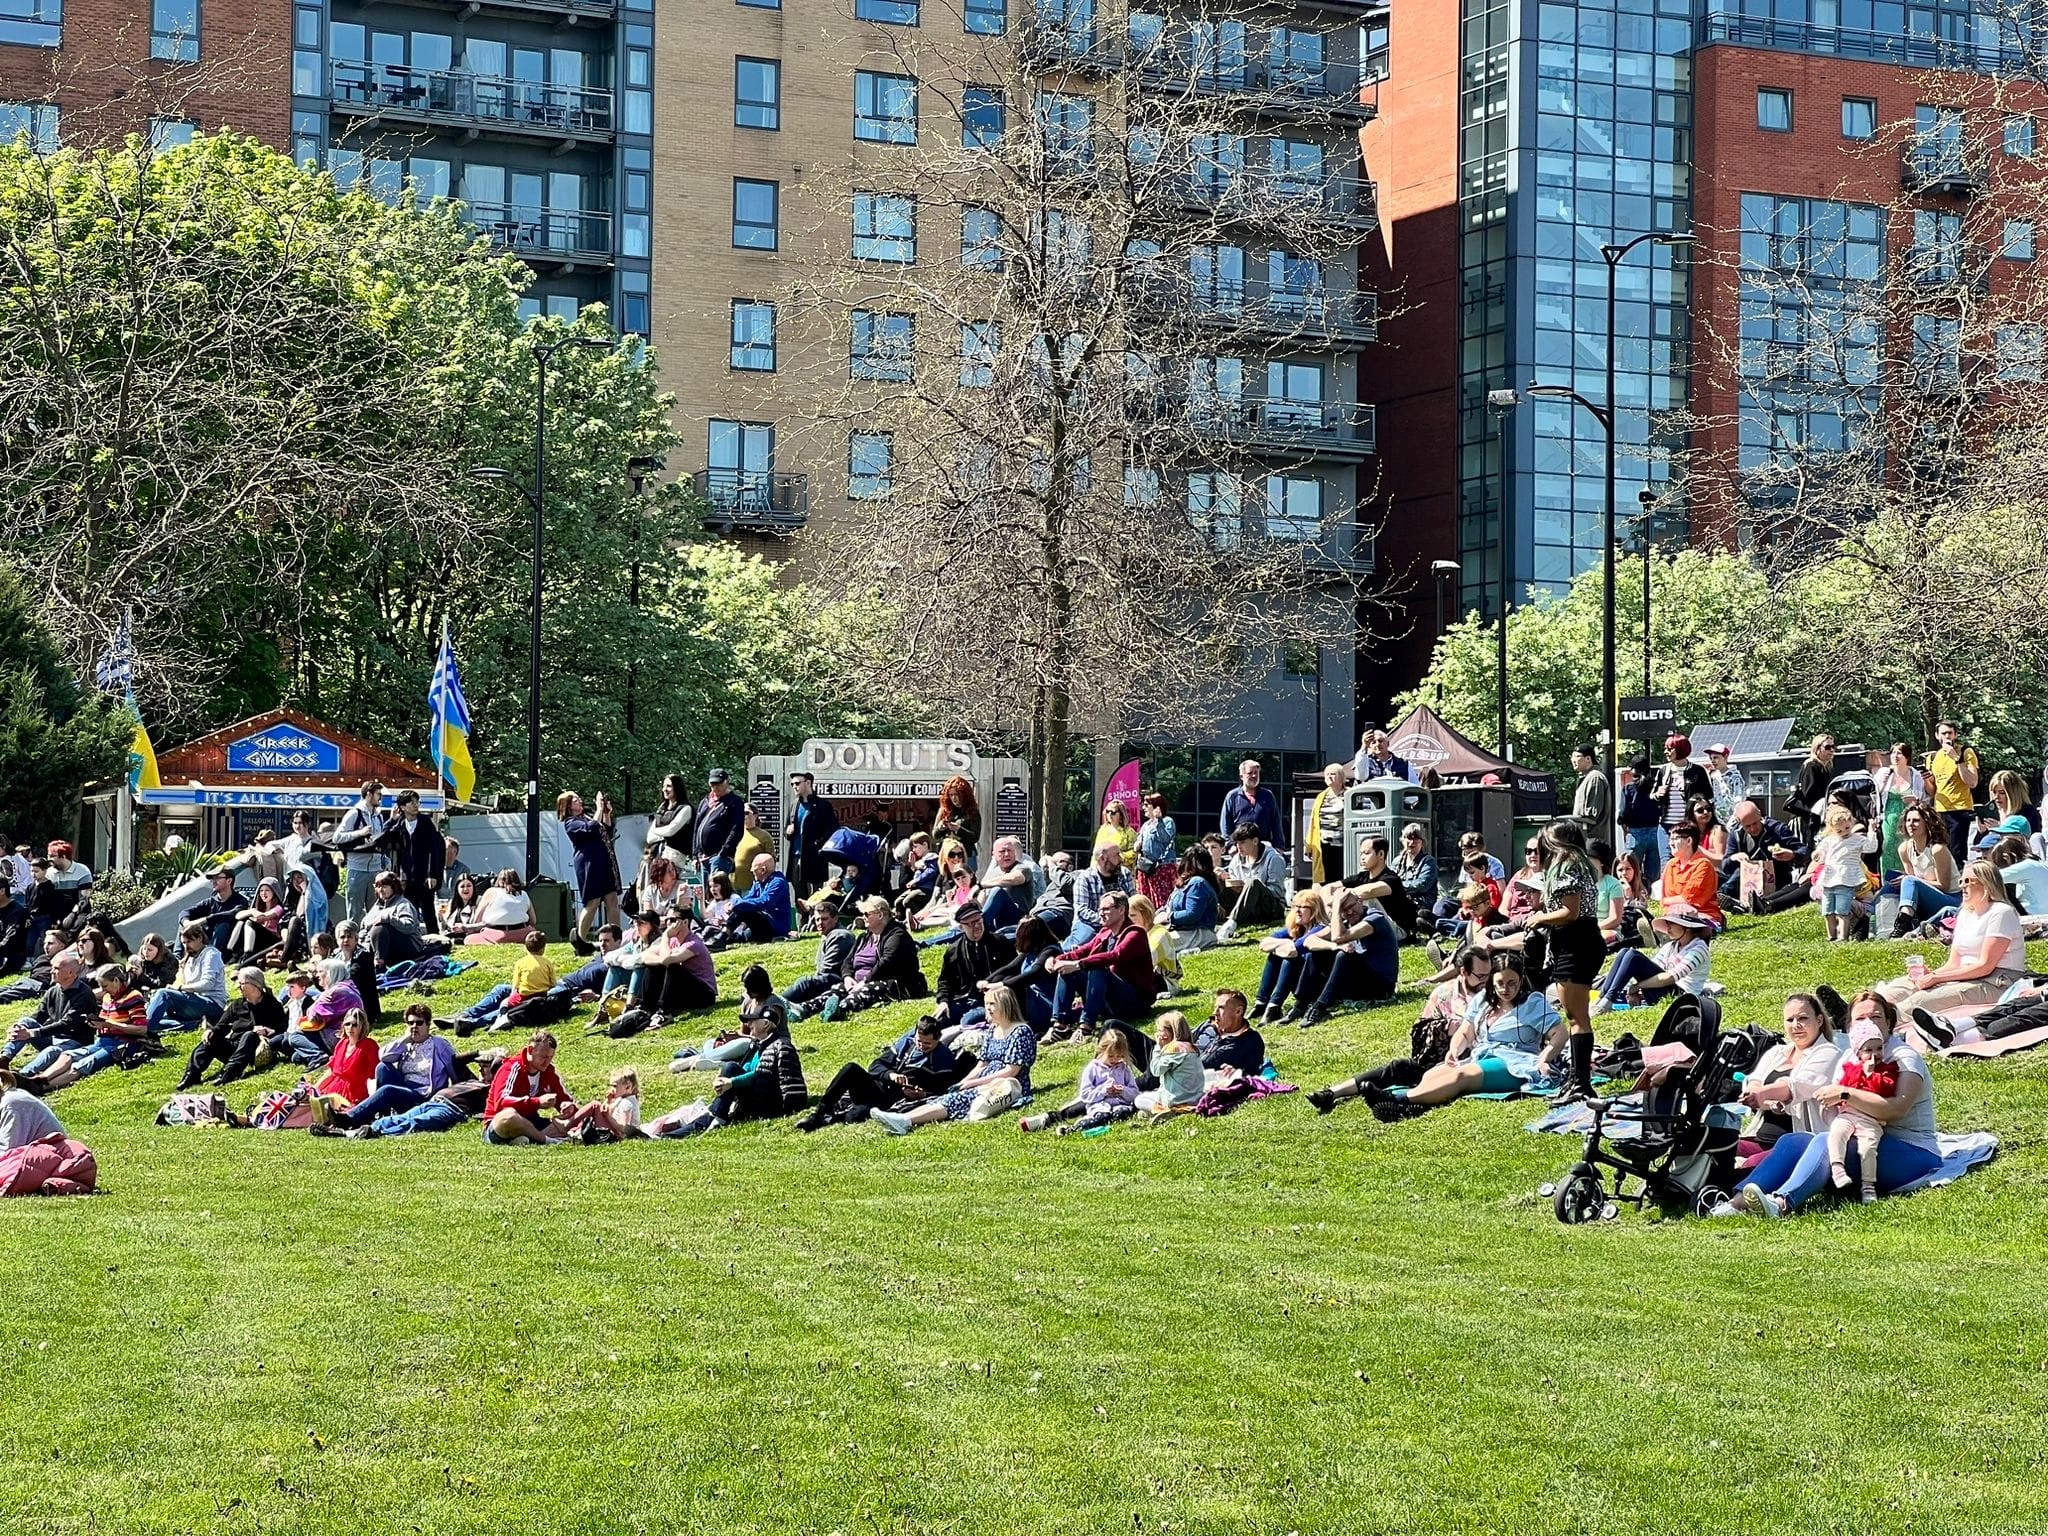 People sit on Devonshire Green in the sunshine watching acts perform on stage.